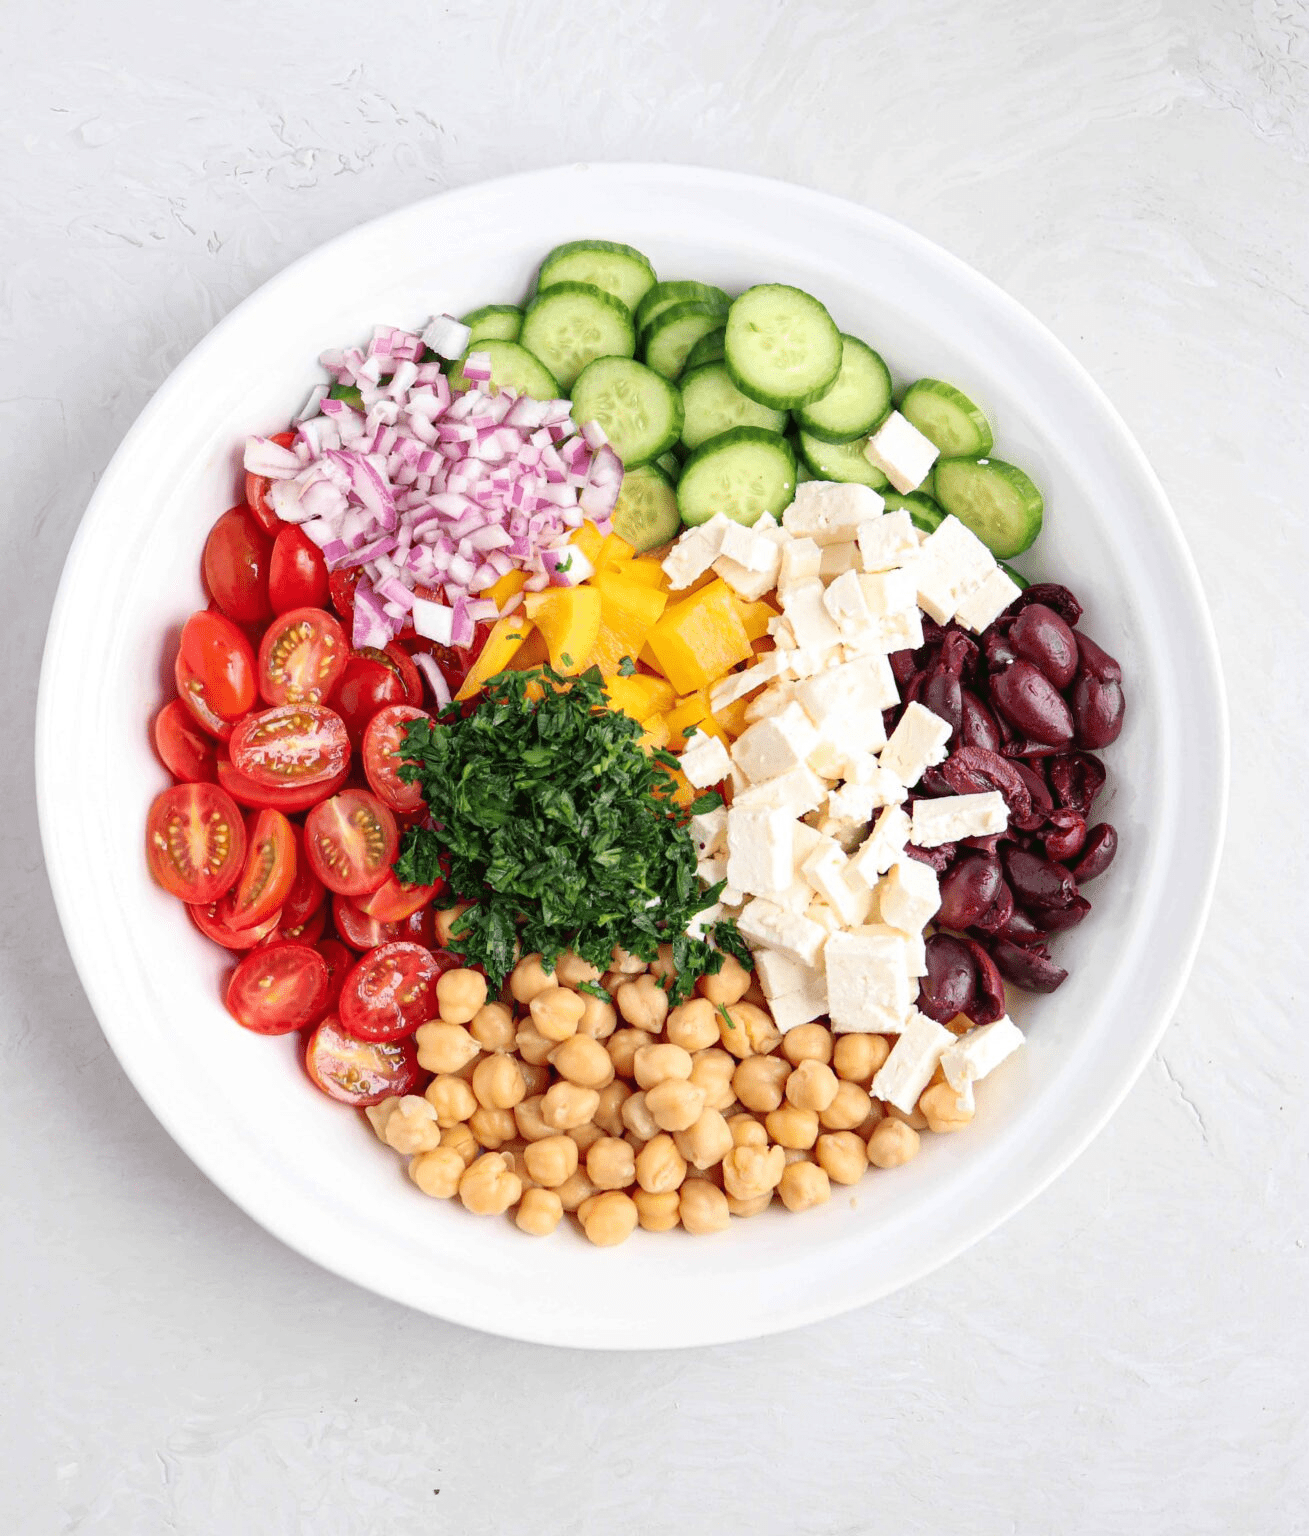 Greek chickpea salad with feta cheese, tomatoes, cucumbers and chickpeas in a large white bowl, before mixing.